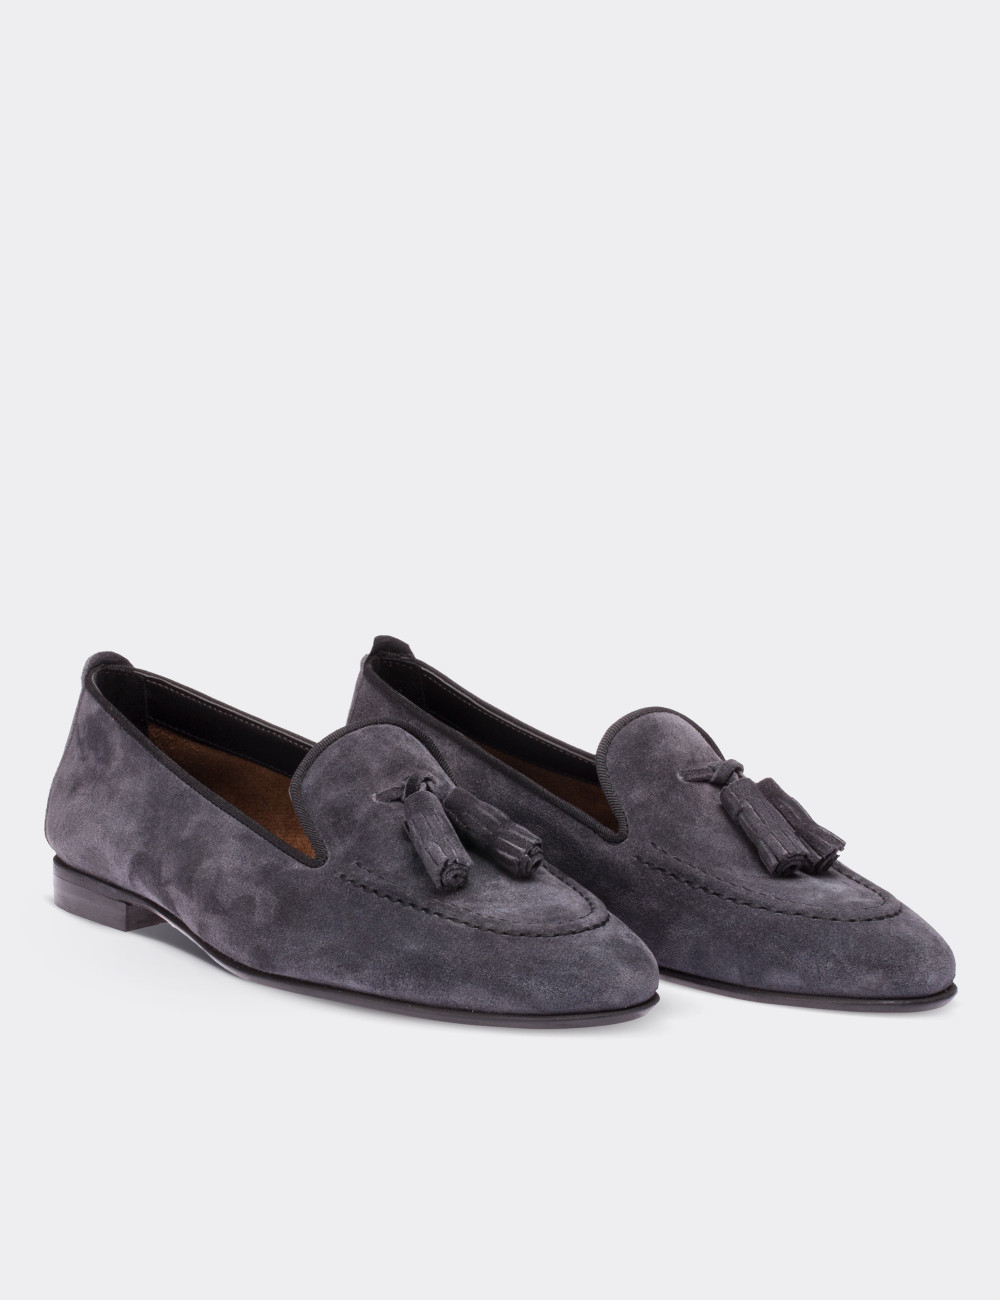 Gray Suede Leather Loafers - 01619ZGRIM01